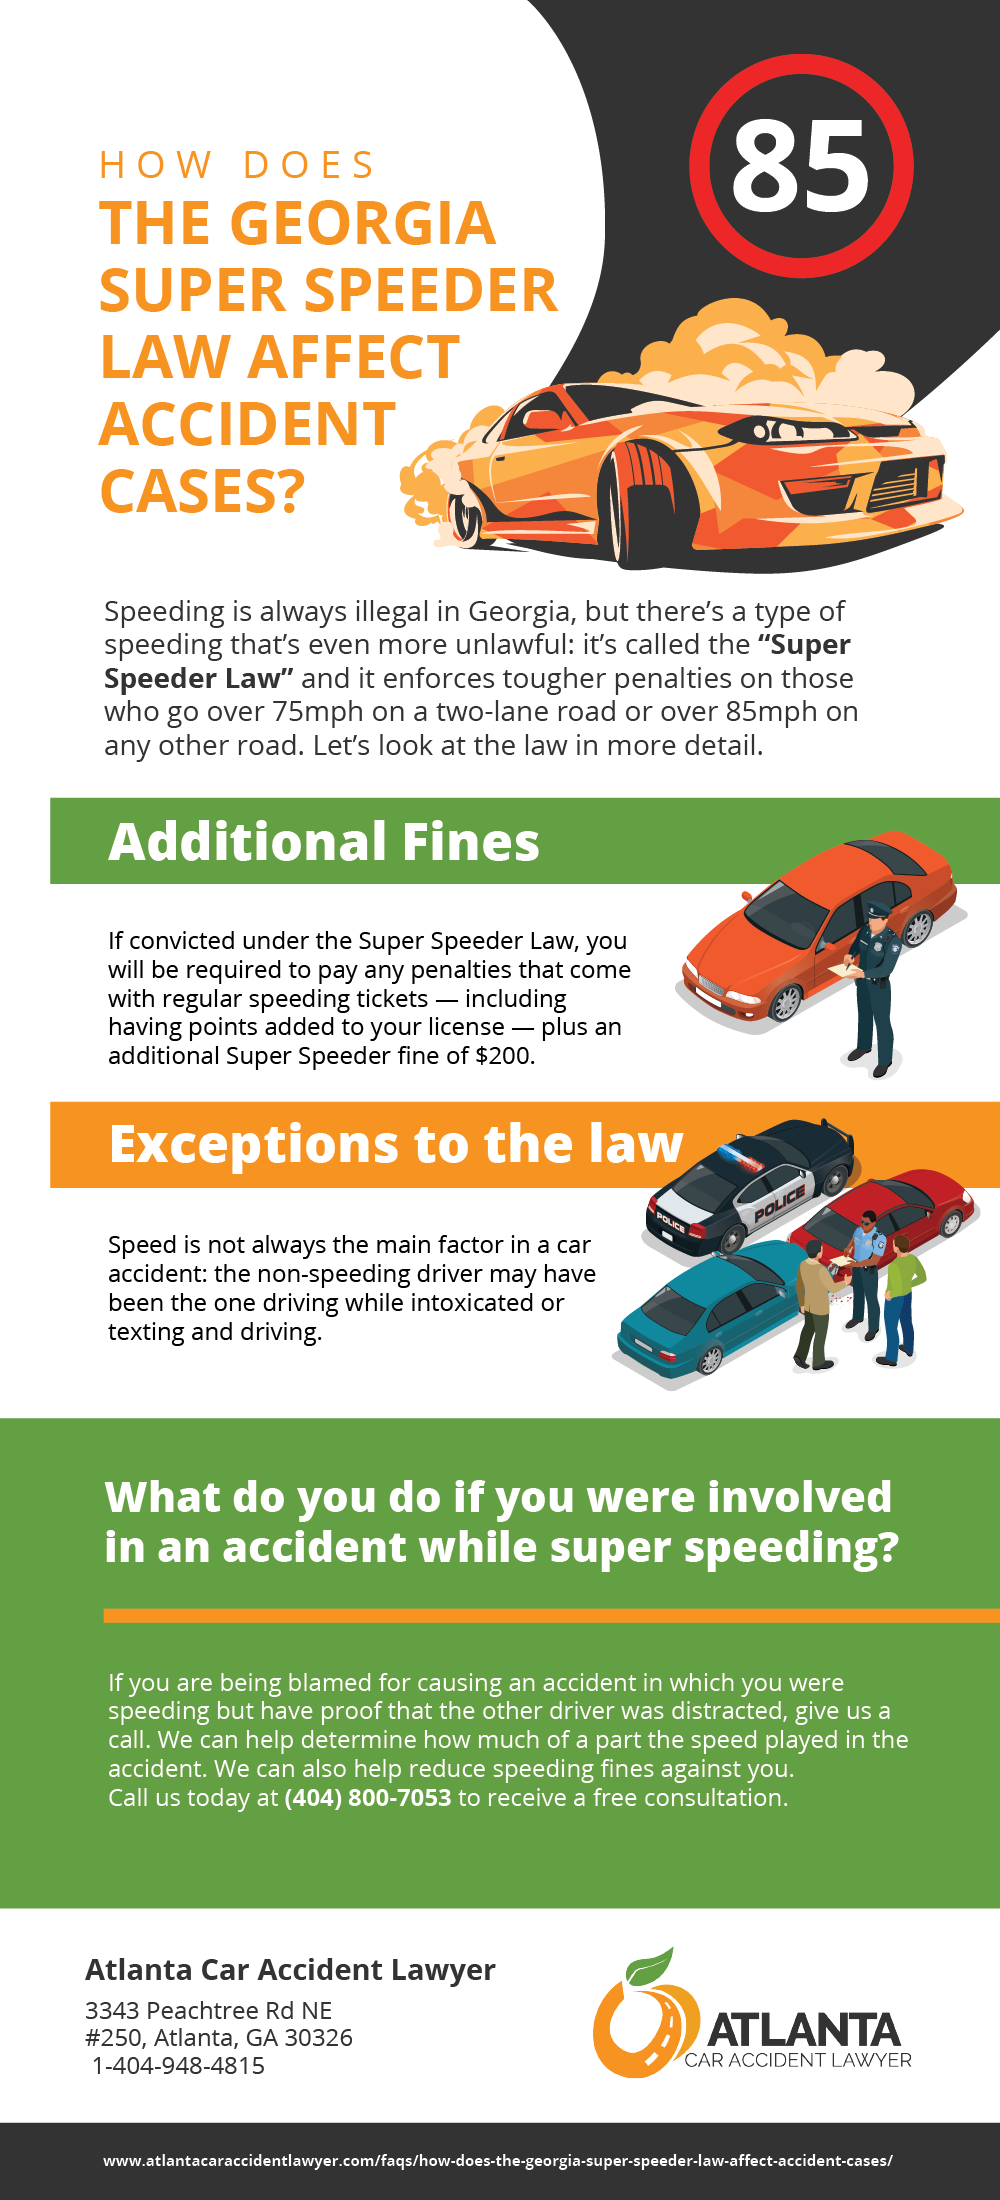 How Does The Georgia Super Speeder Law Affect Accident Cases?